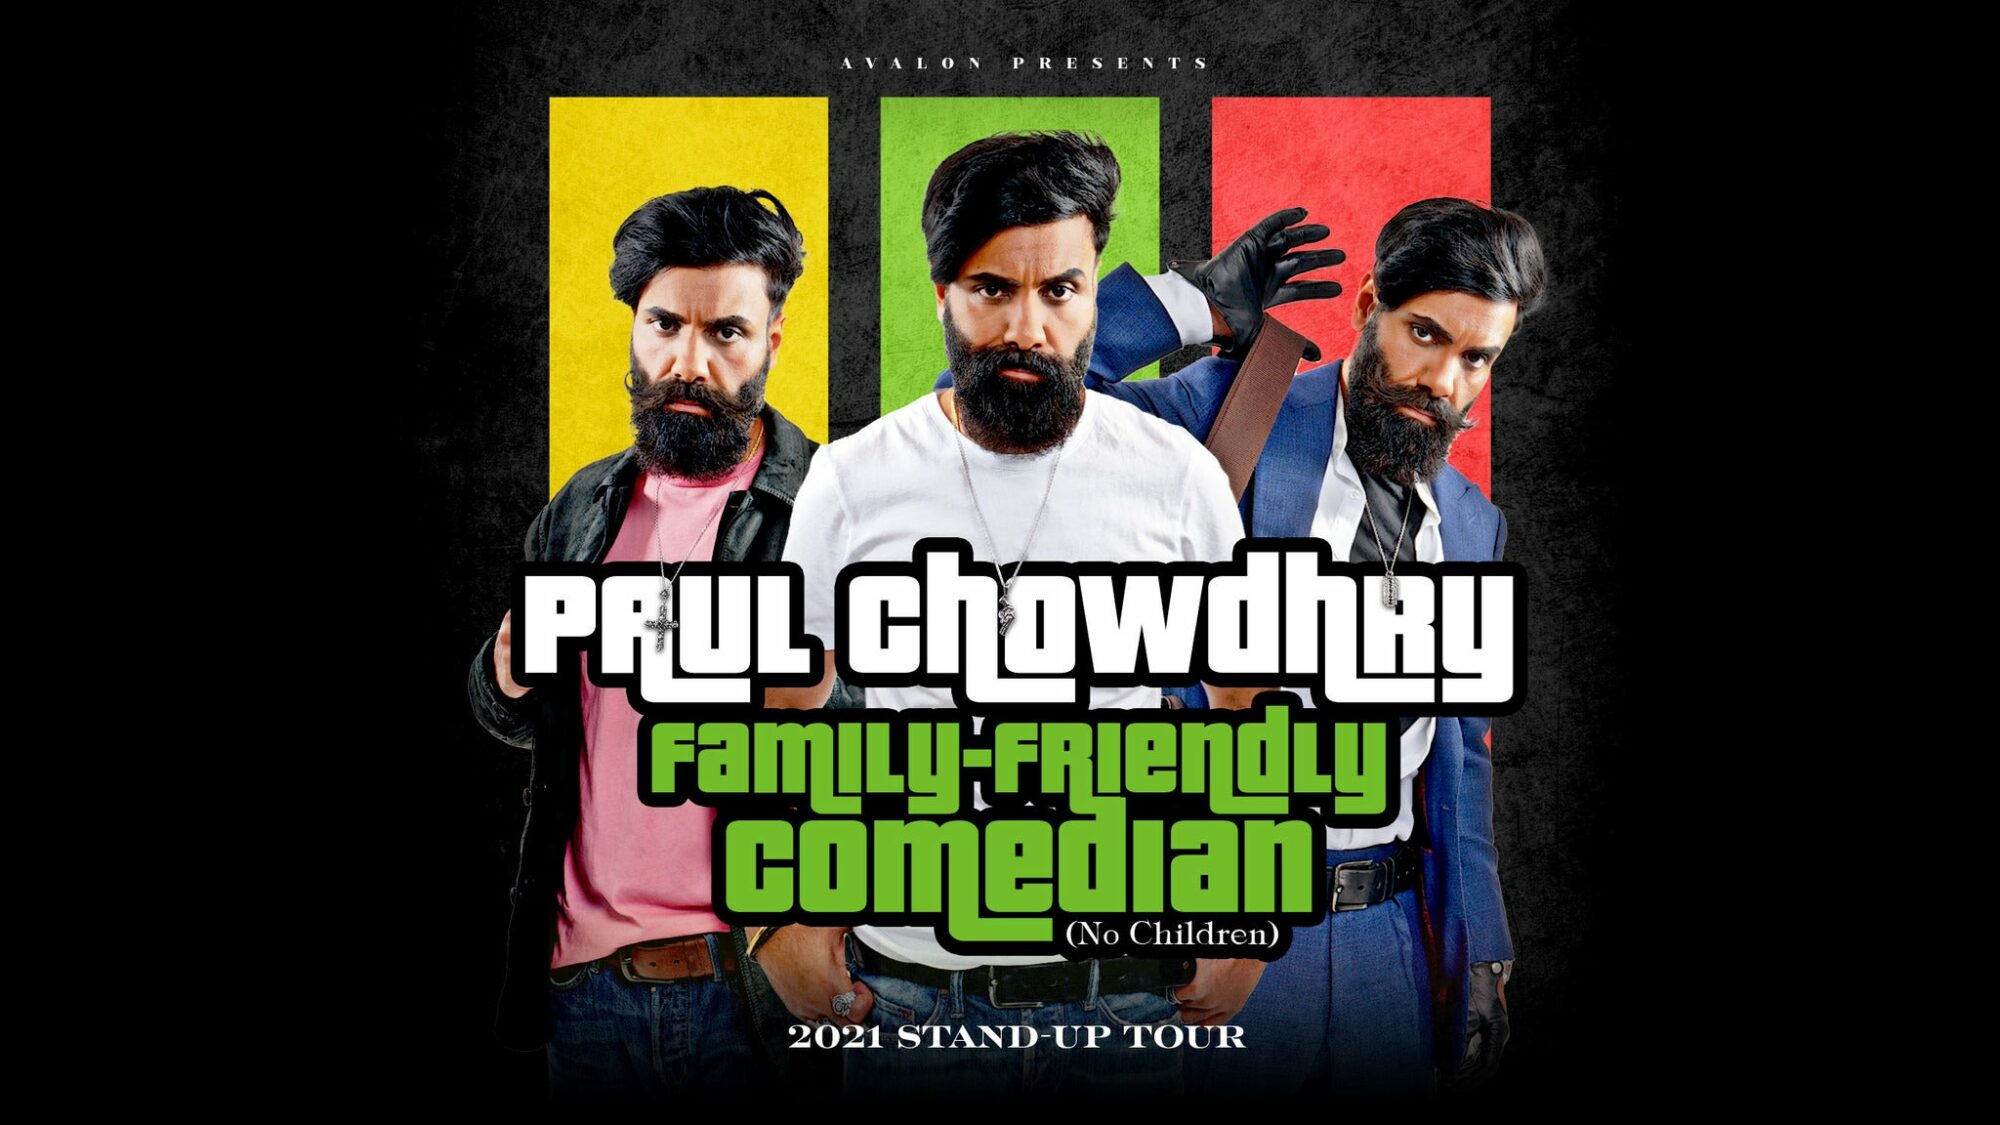 Image name Paul Chowdhry Family Friendly Comedian at St Georges Hall Bradford Bradford the 6 image from the post Events in Yorkshire.com.